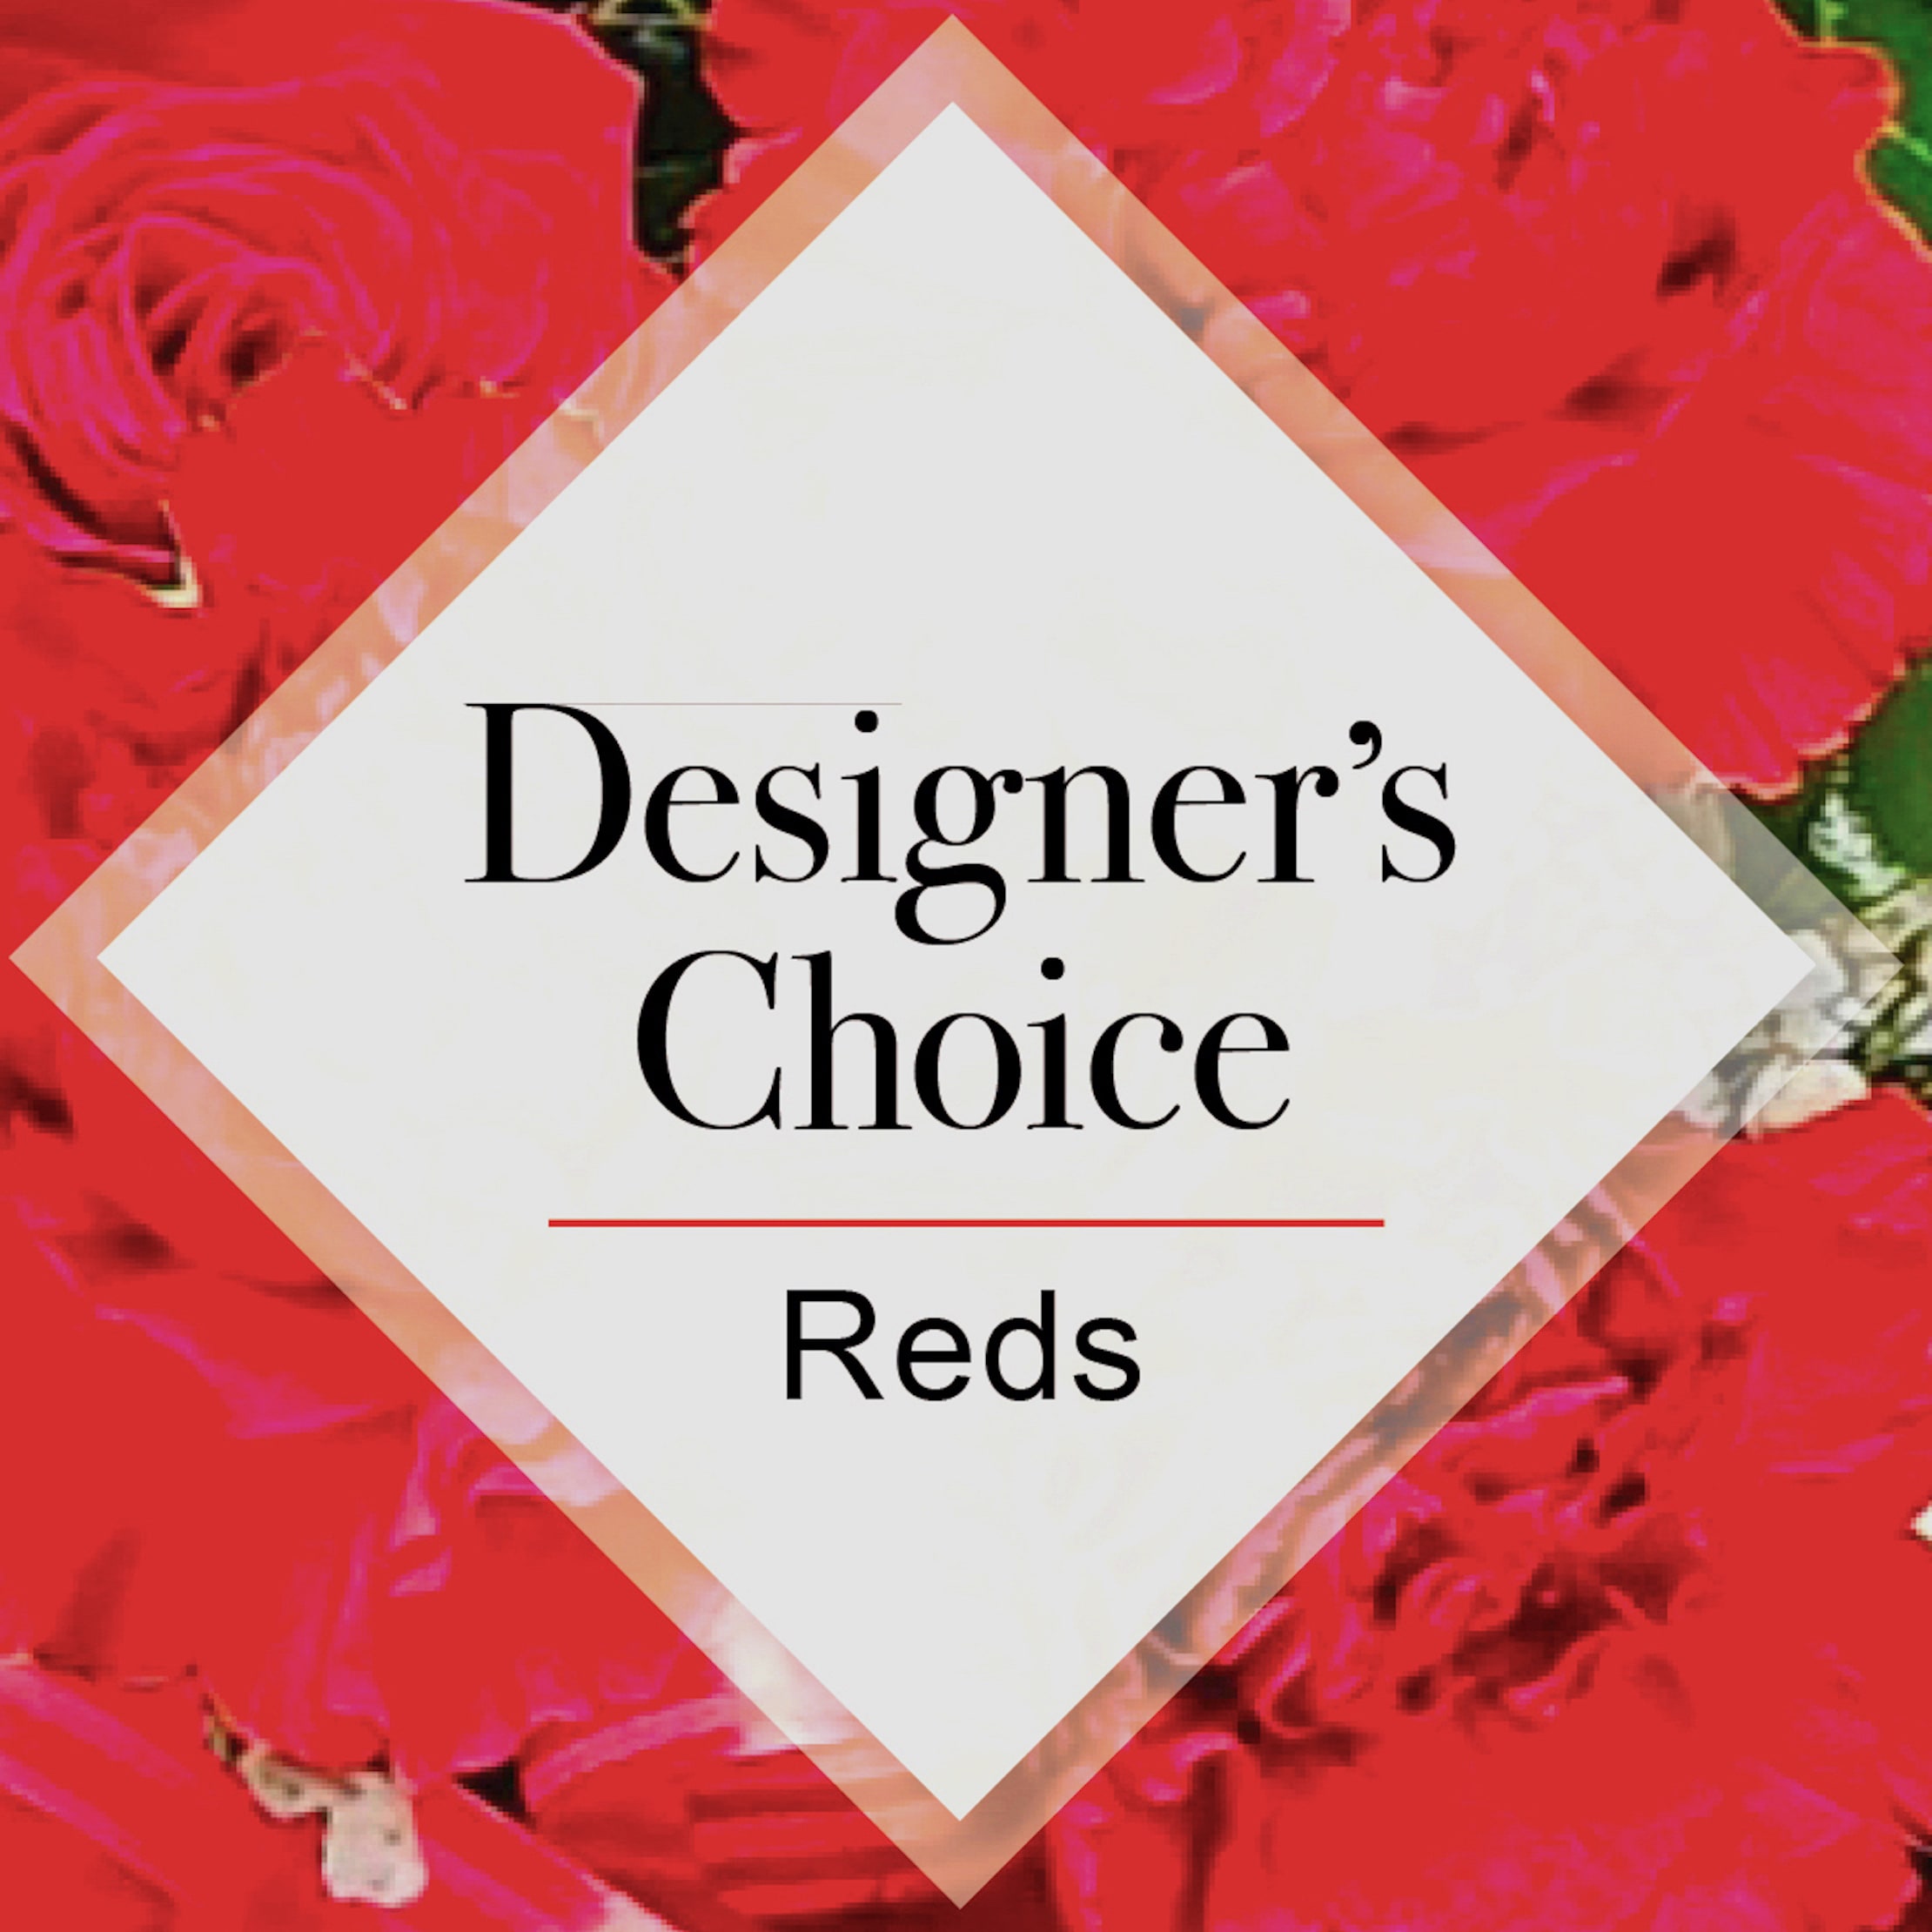 Designers Choice Red - A selection that will be predominately the color that you have chosen with accents and greenery to compliment. The designers have the flexibility to create something unique and beautiful for you and is often the best value for you. If you have specifics you would like to request please include in the comments / special instructions area when placing your order.